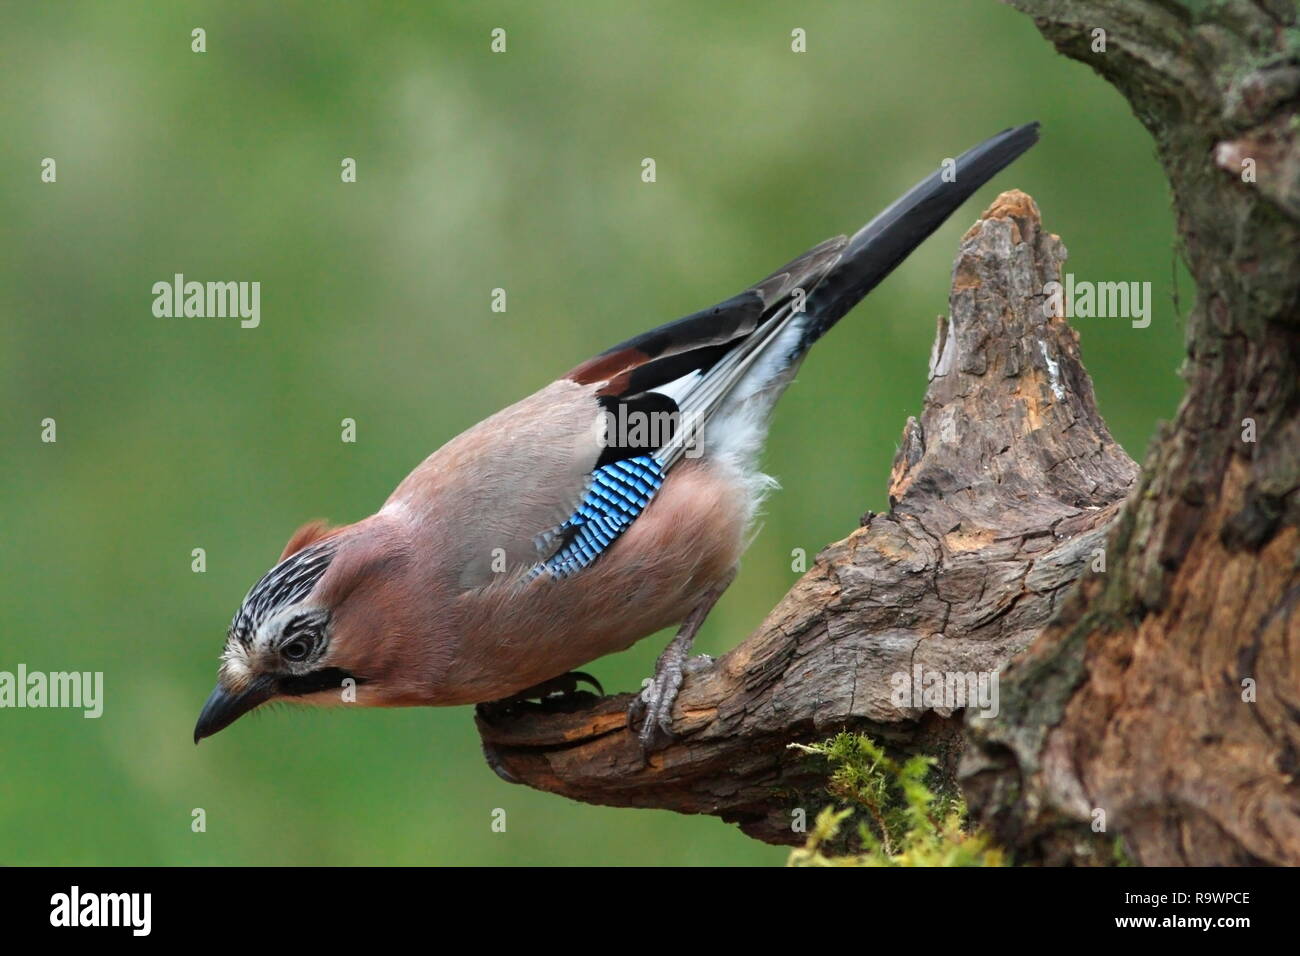 Jay (Garrulus glandarius) on a tree stump in a clearing in a wooded area, UK. Stock Photo